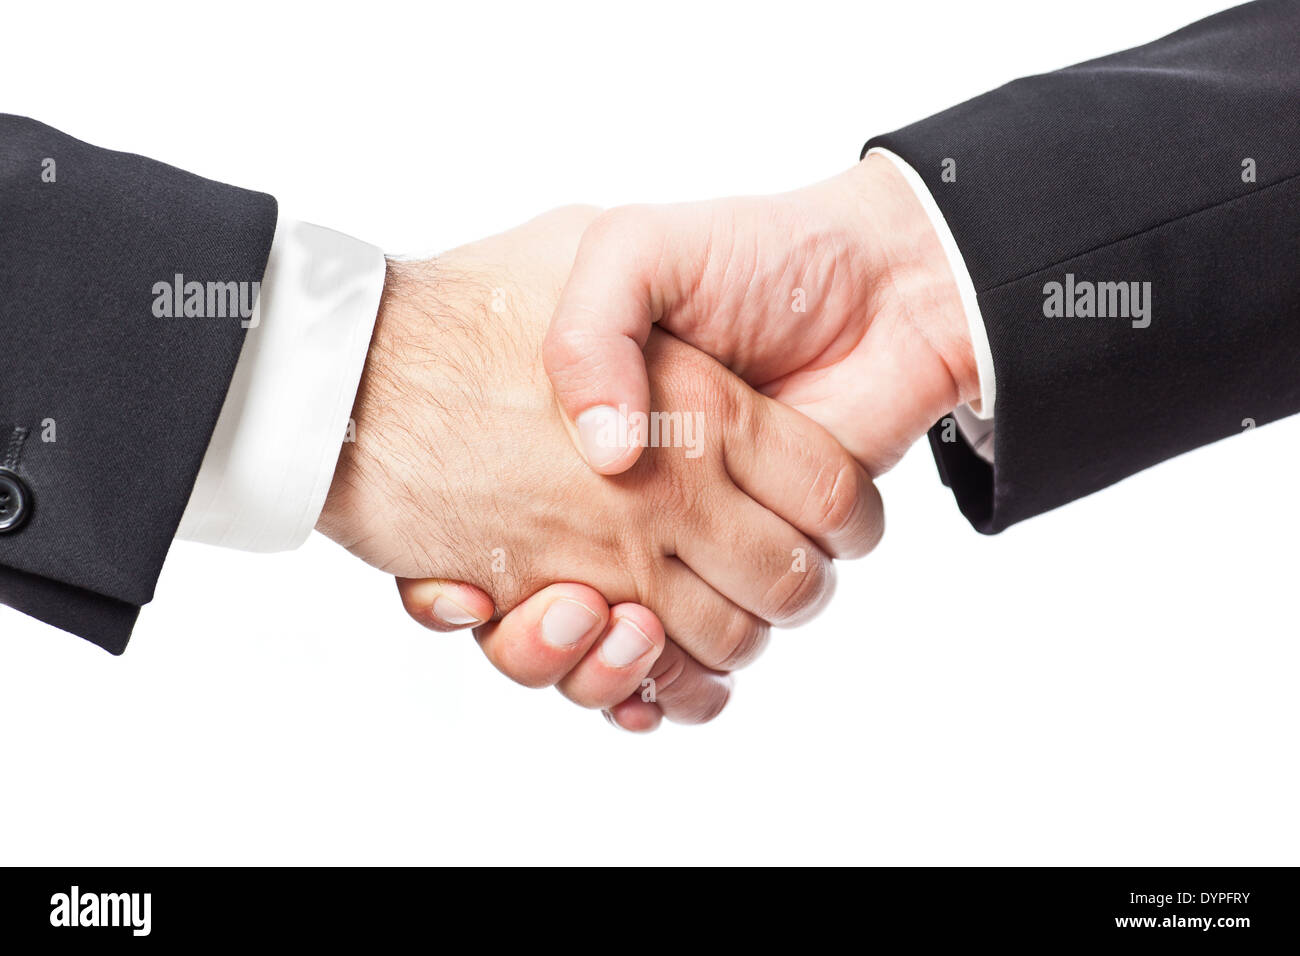 two businessman shaking hands on a white background Stock Photo